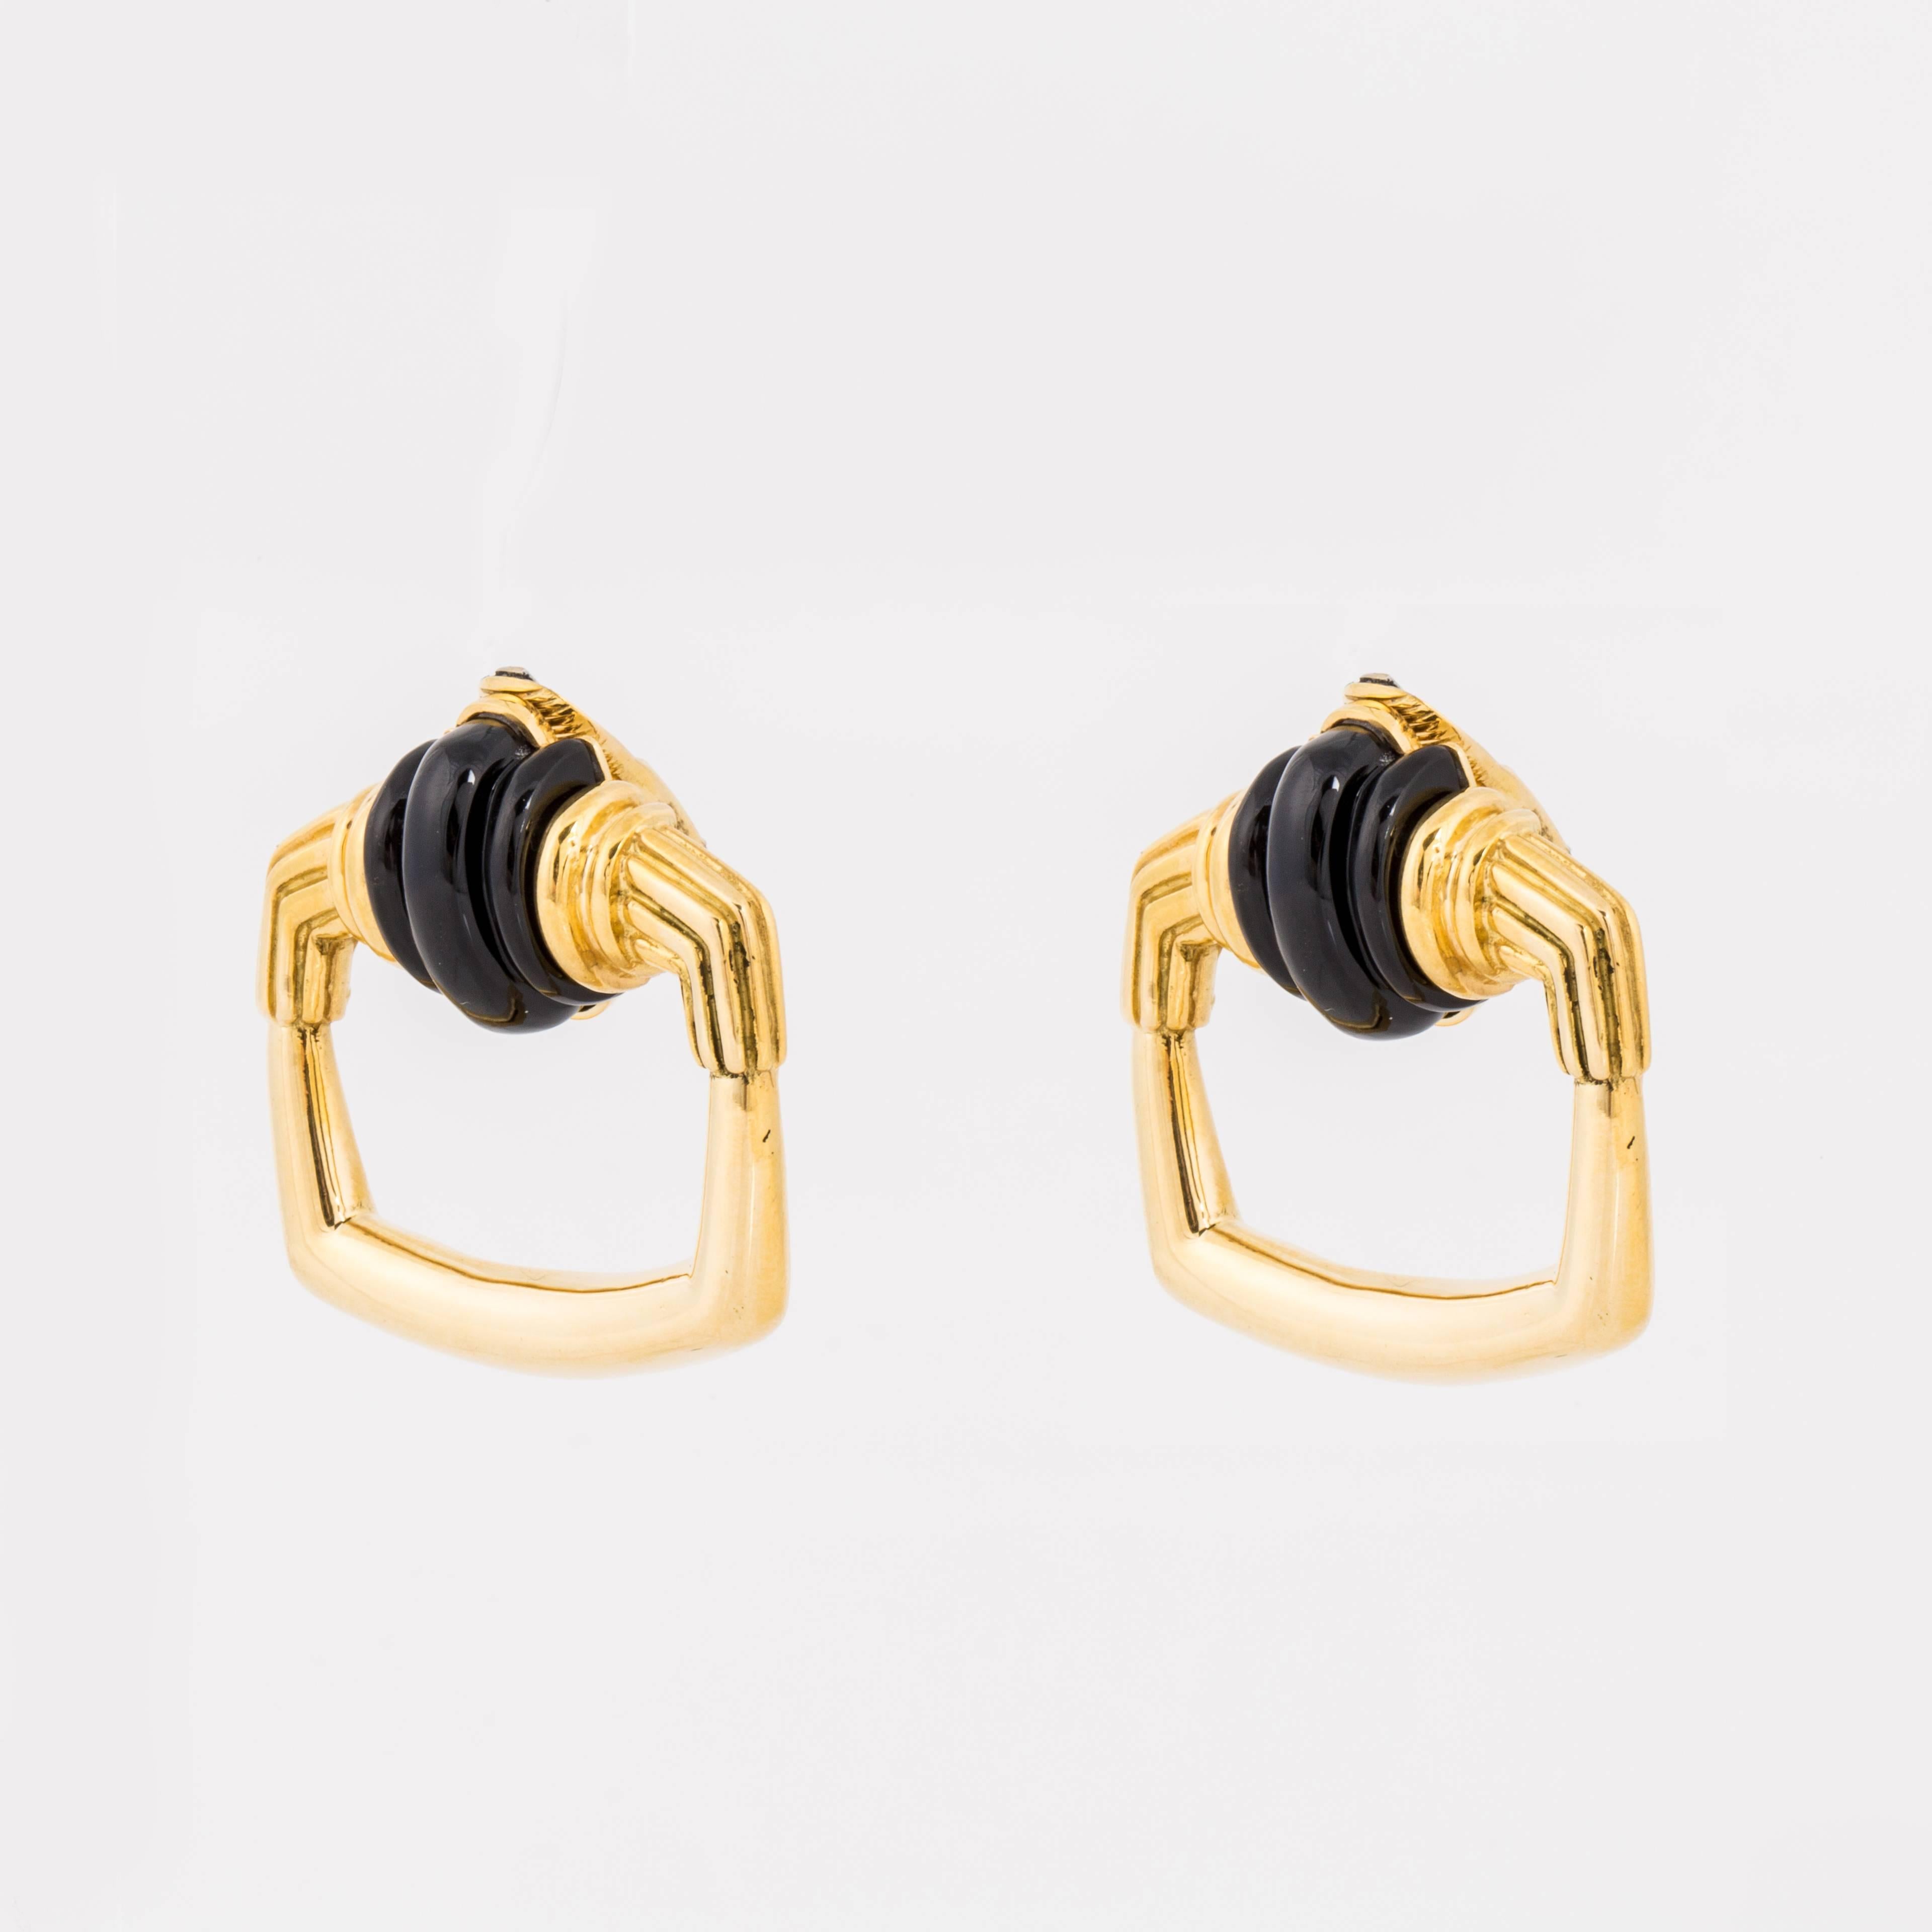 Aldo Cipullo doorknocker style earrings in 18K yellow gold and carved onyx.  Marked 